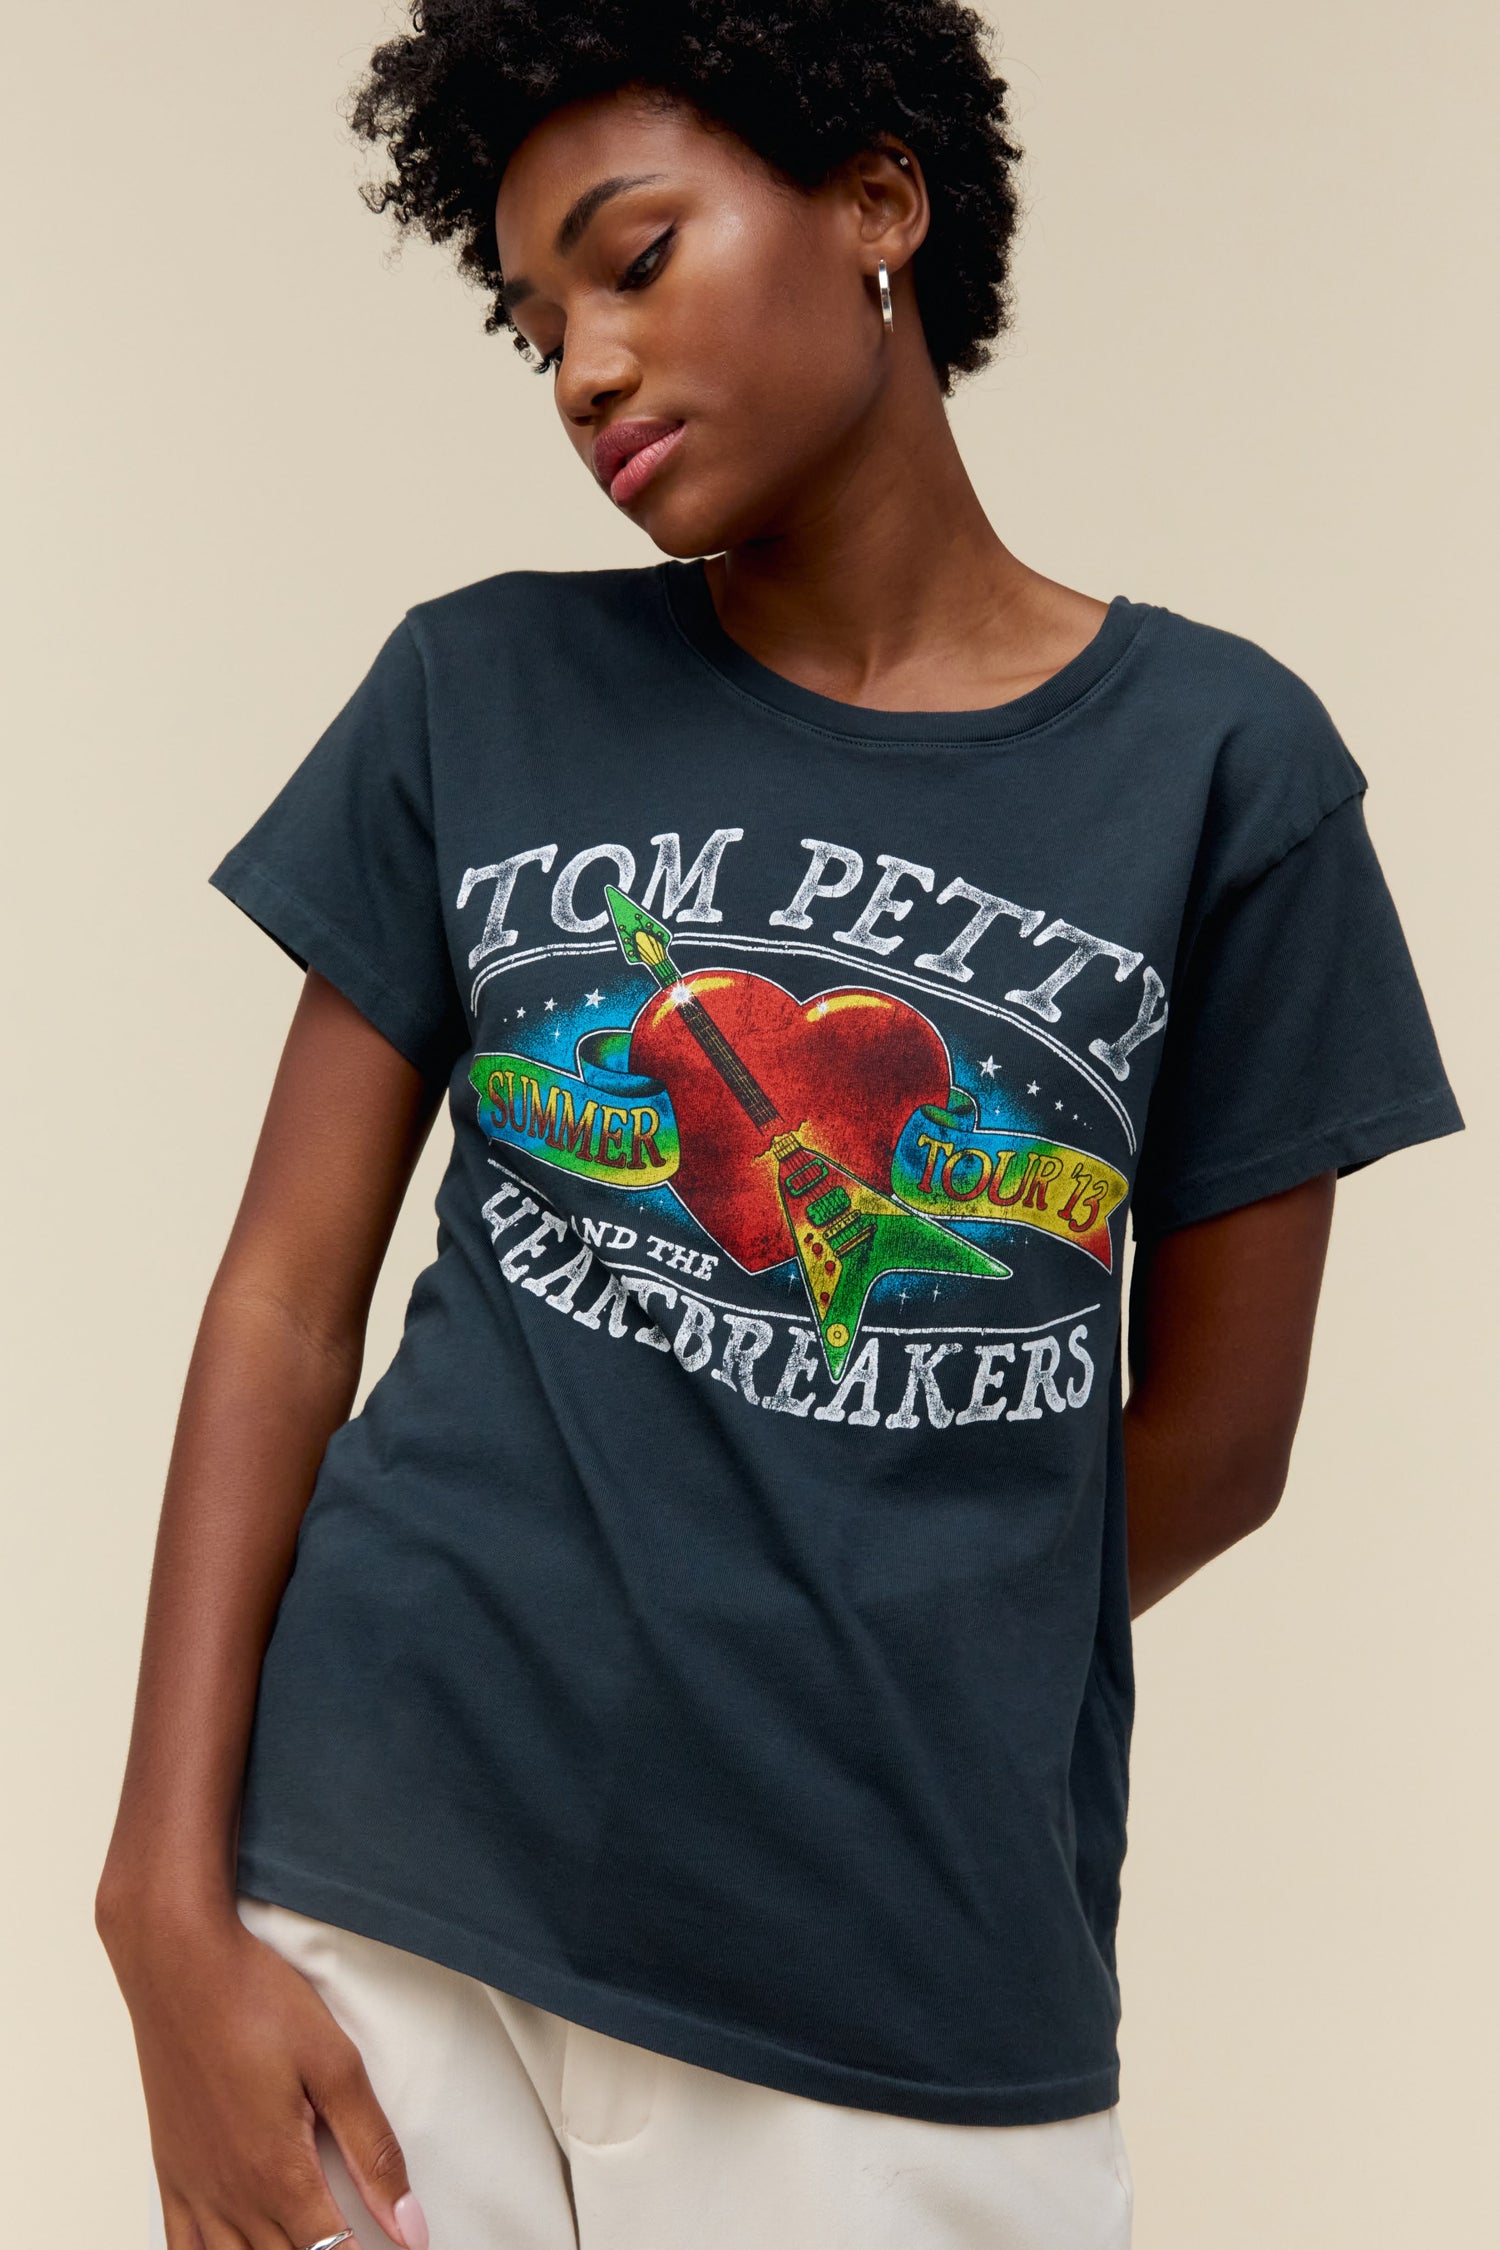 A model featuring a black tee stamped with Tom Petty and designed with a graphic heart on the center.